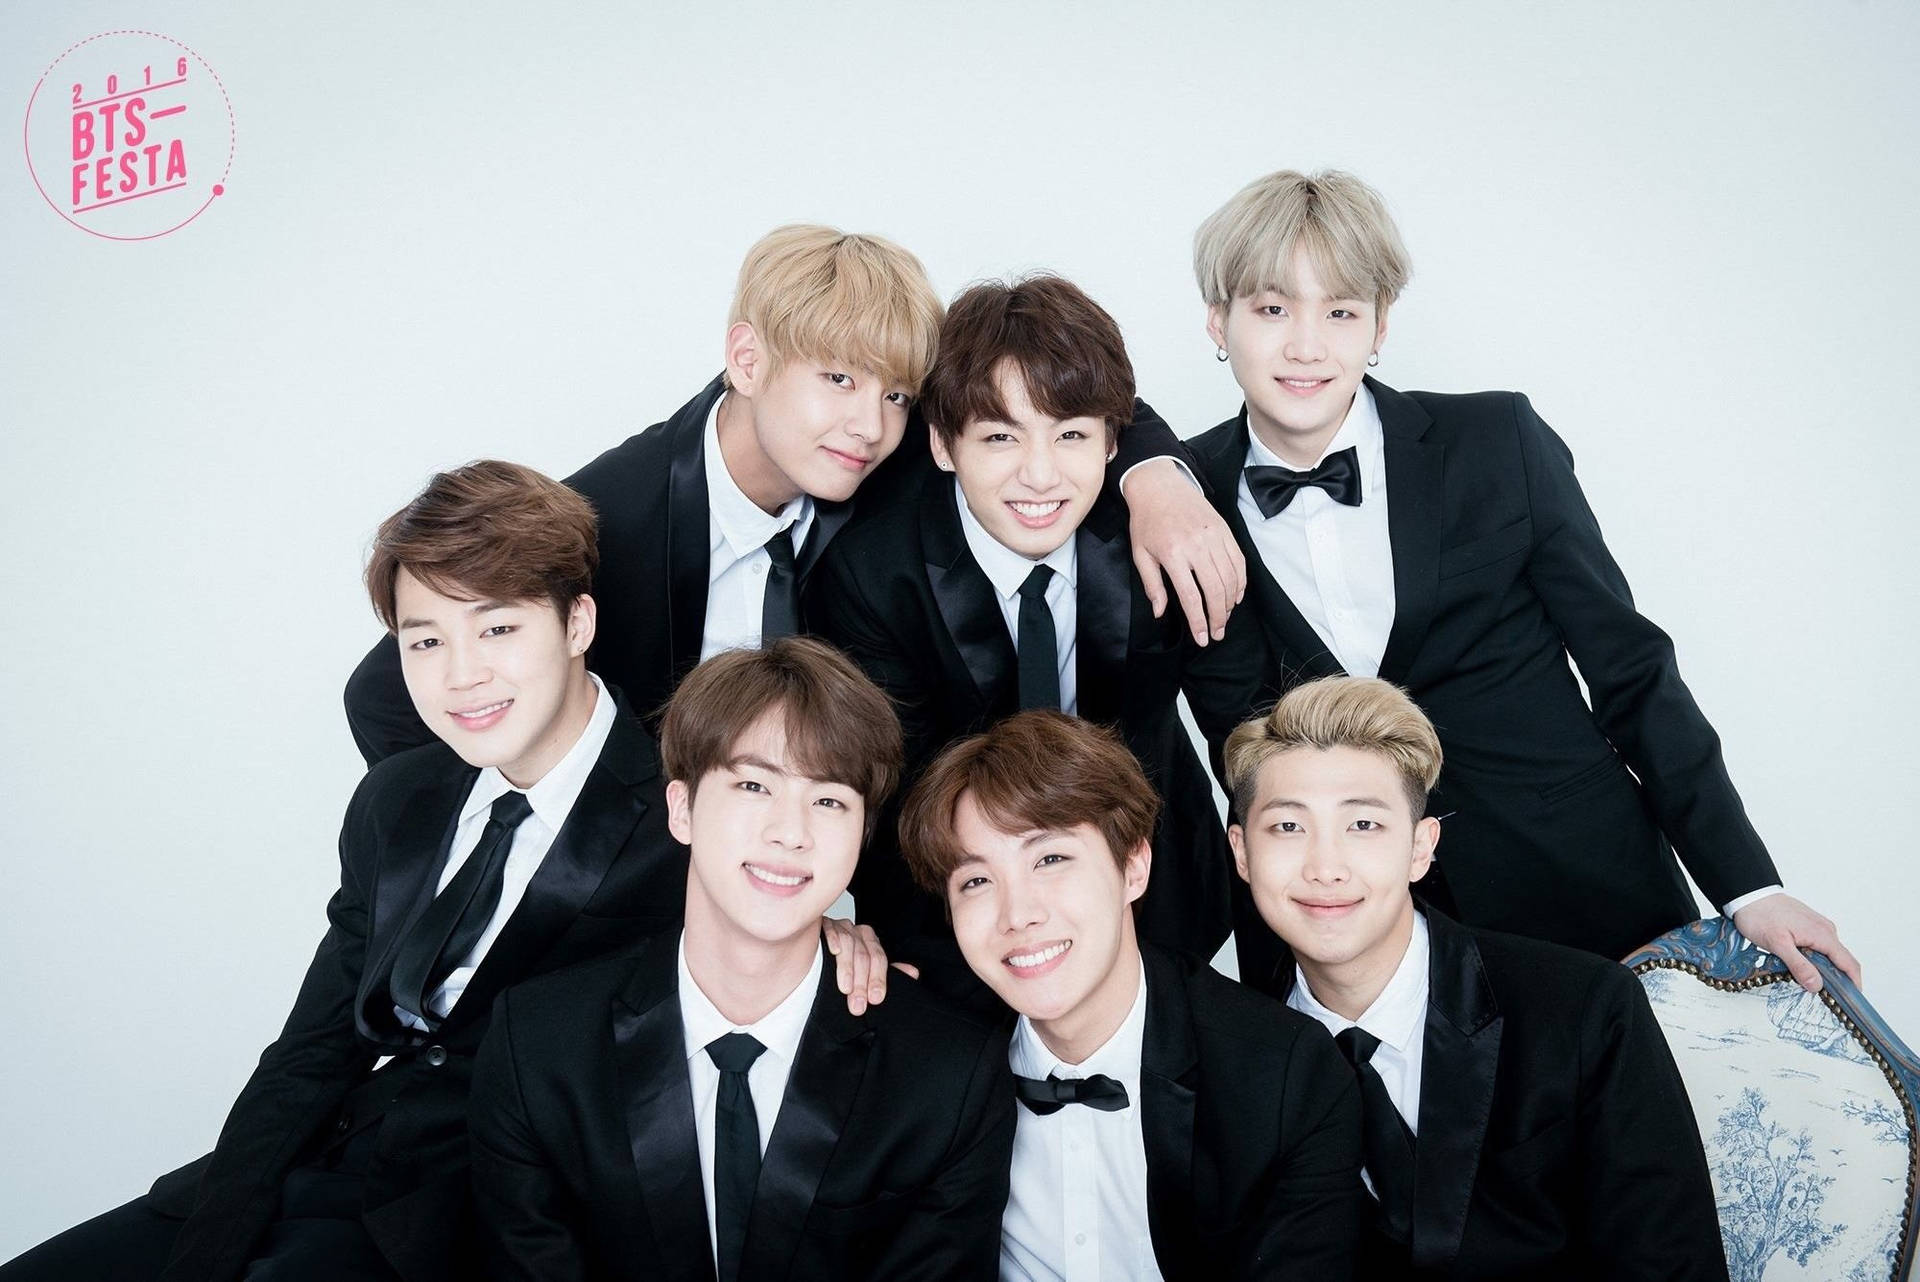 Free Bts Wallpaper Downloads 1000 Bts Wallpapers for FREE  Wallpapers com